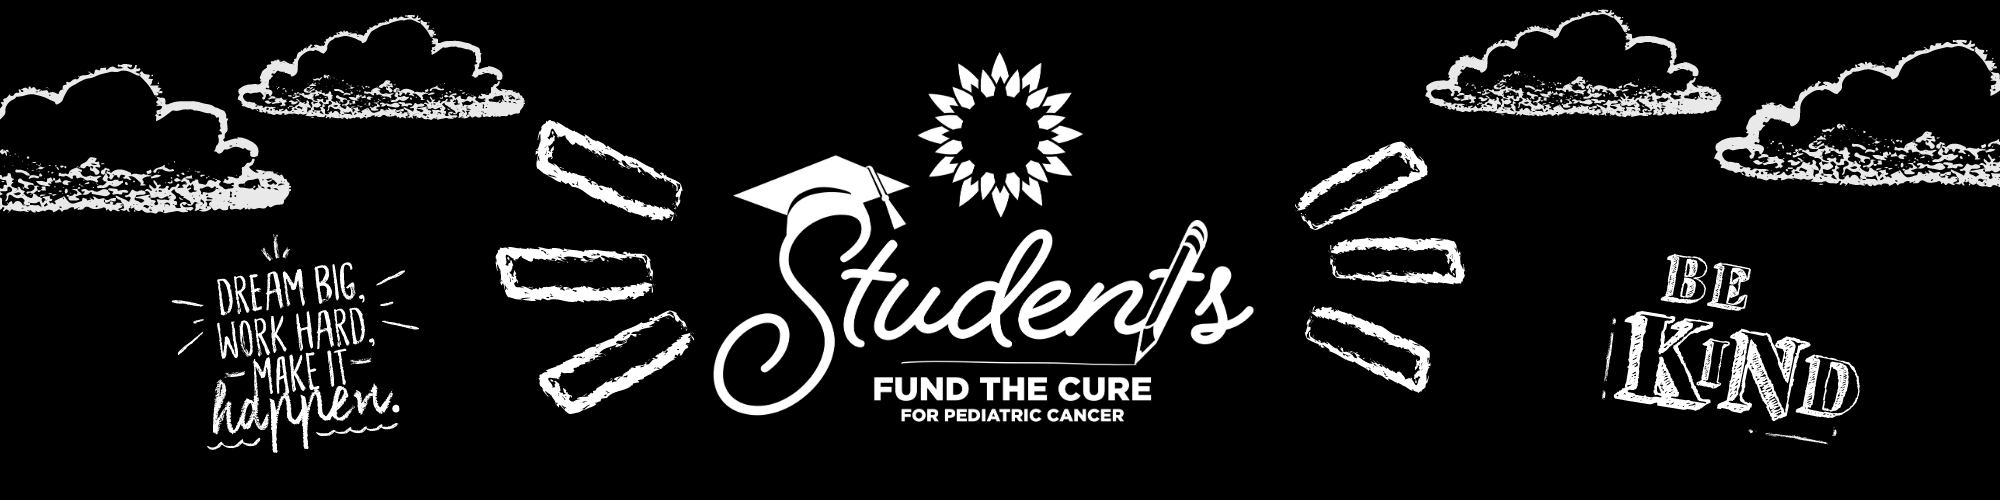 Students Fund the Cure